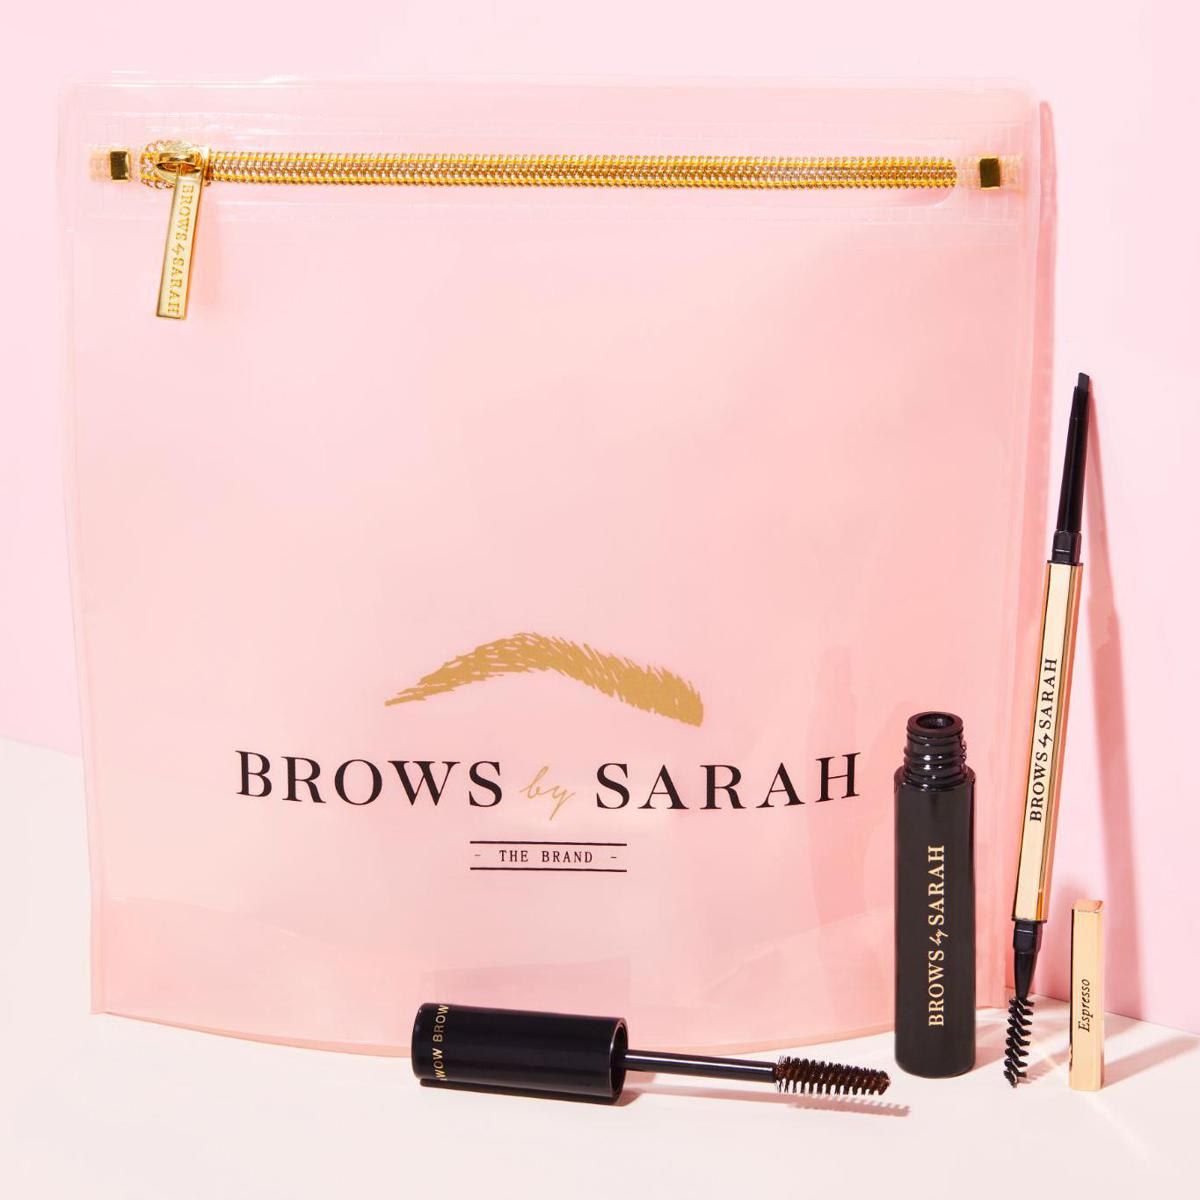 Brows by Sarah products are cruelty free, hydrating and have significant anti aging and regrowth benefits. They are ethical, effective and elegant